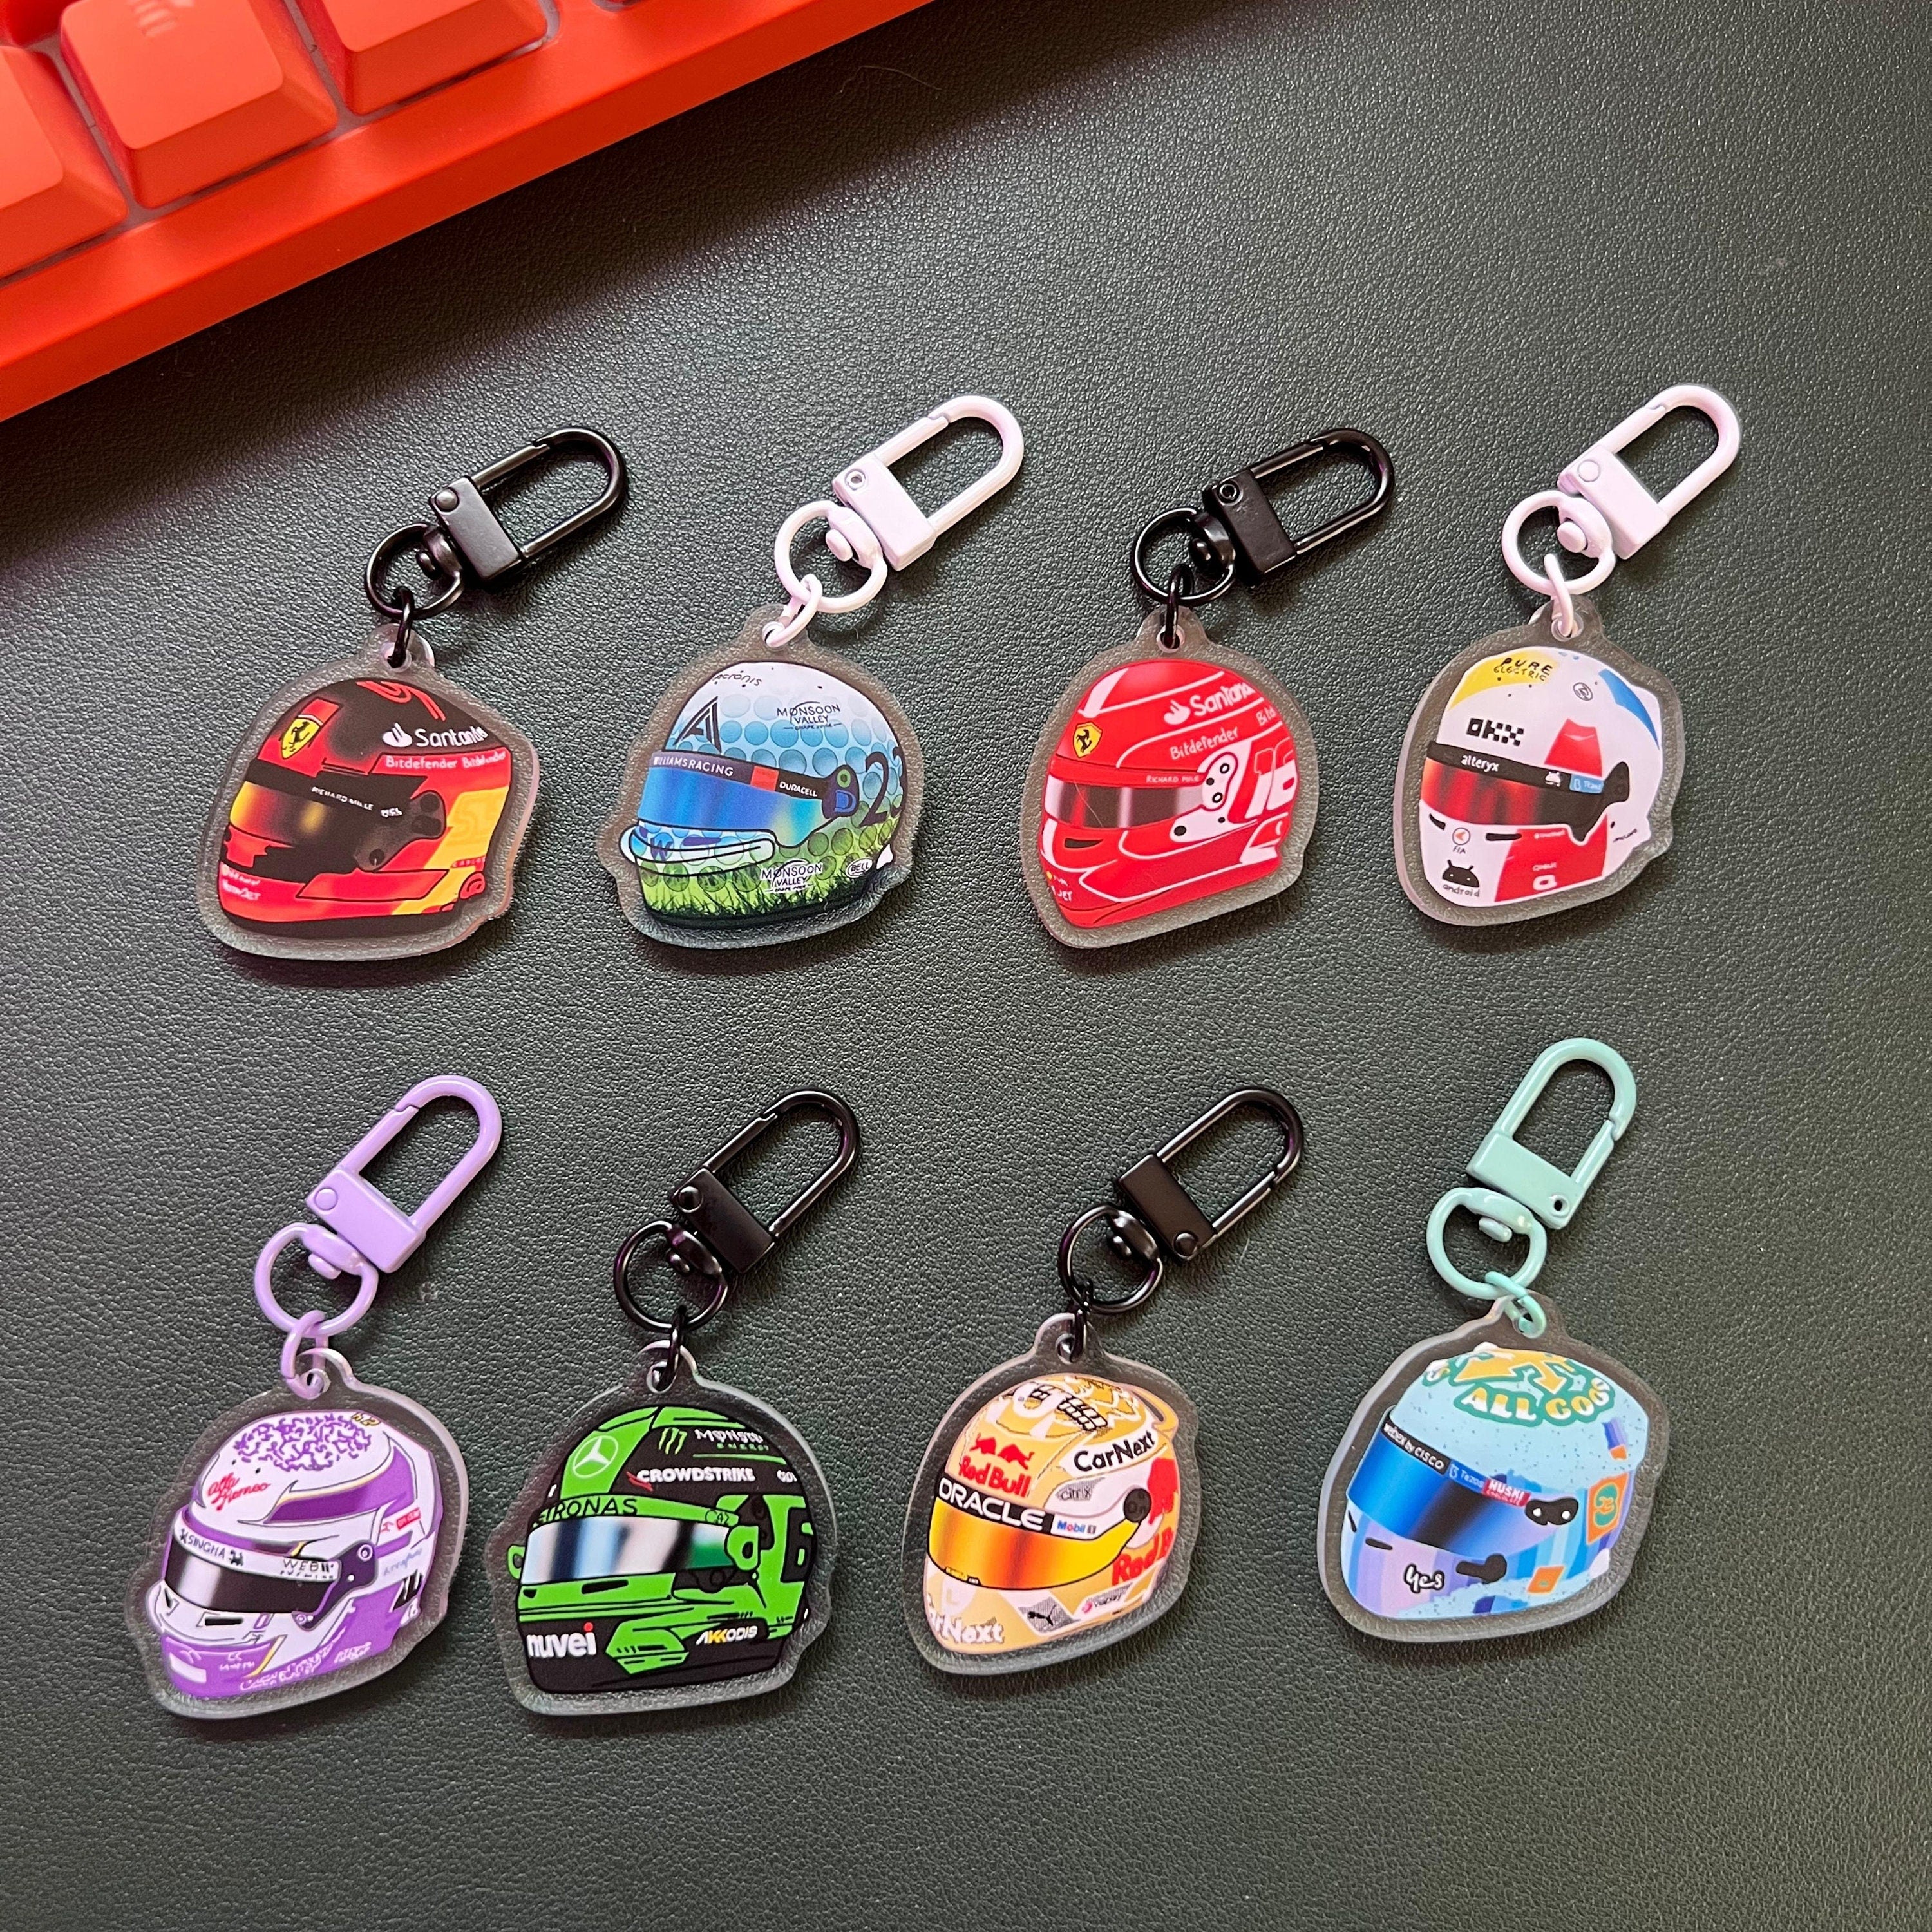 F1 helmet acrylic charm MYSTERY PACKS | F1 driver keychains for backpacks, bags, and more! | formula one keychains